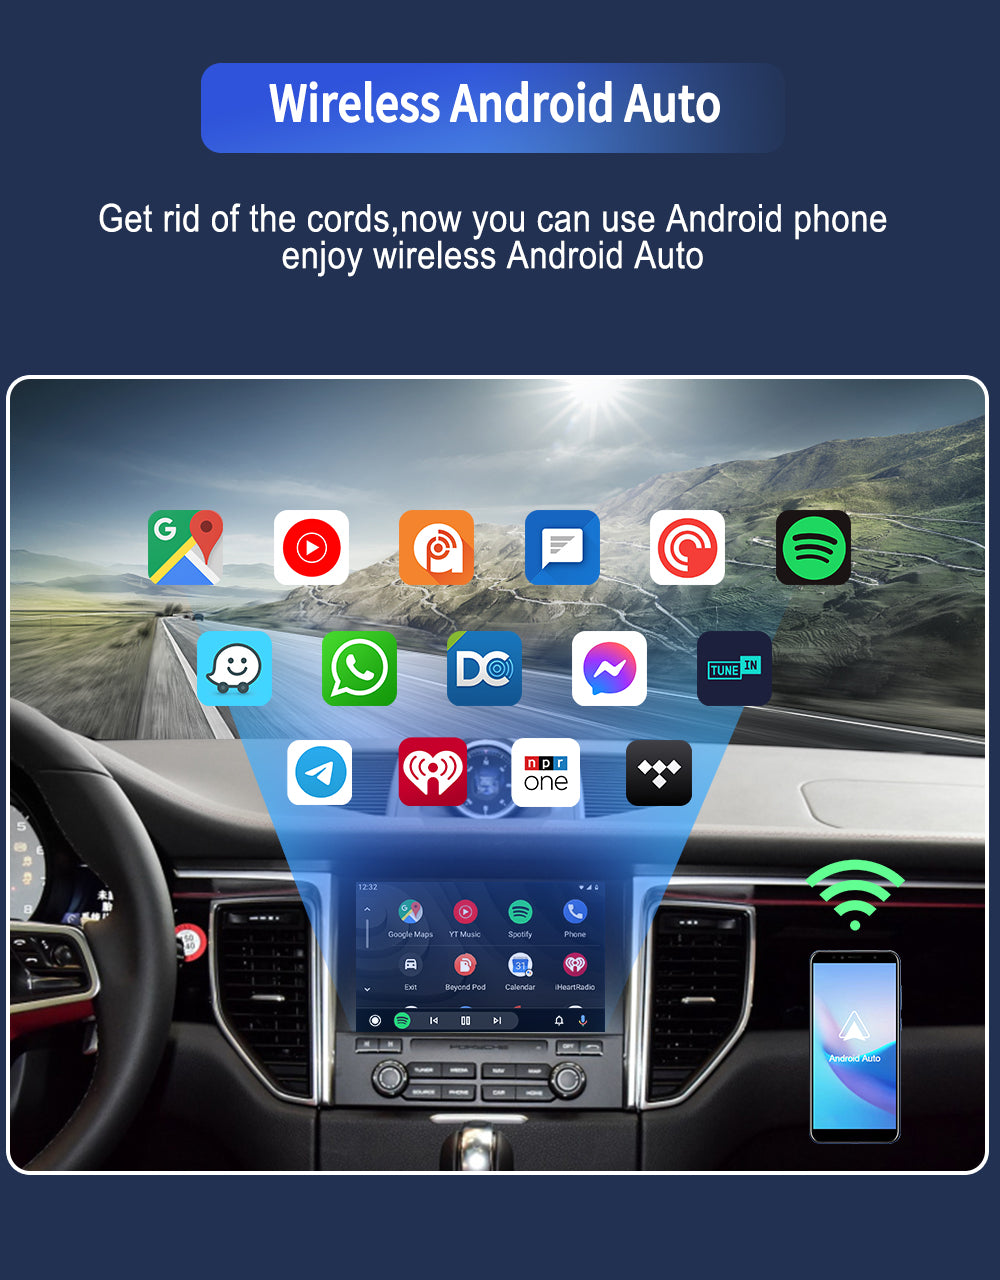 Carlinkit 4.0 CPC200-CP2A wired to wireless CarPlay carbon fibre shell – Carlinkit  Wireless CarPlay Official Store